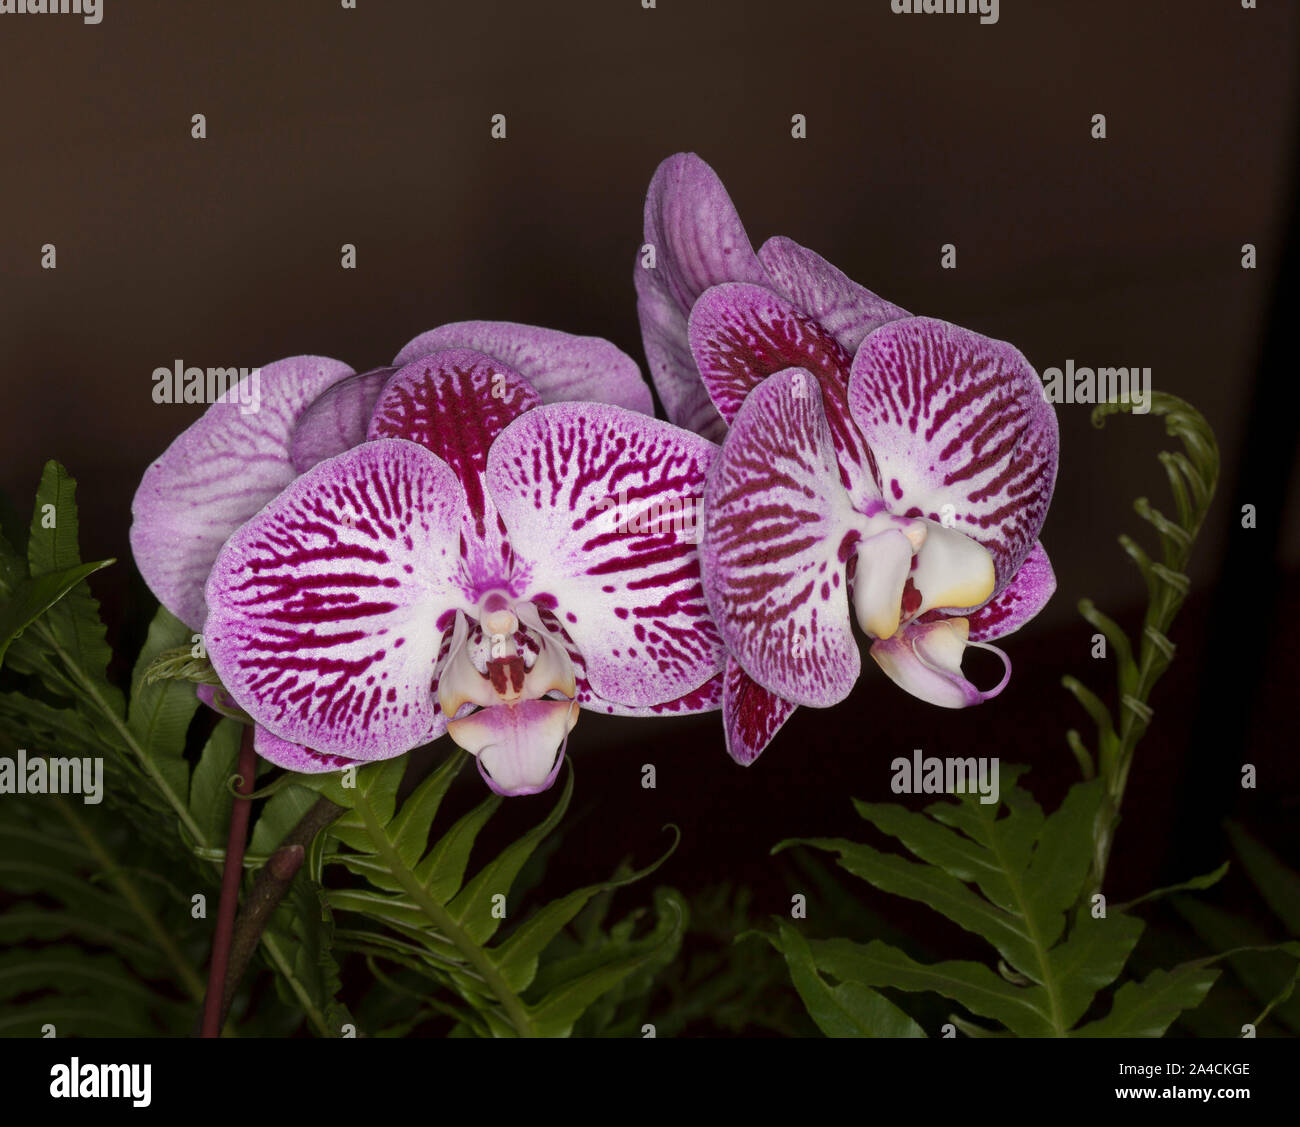 Cluster of stunning purple / red and white flowers of Phalaenopsis / Moth Orchid beside fern leaves and on dark background Stock Photo